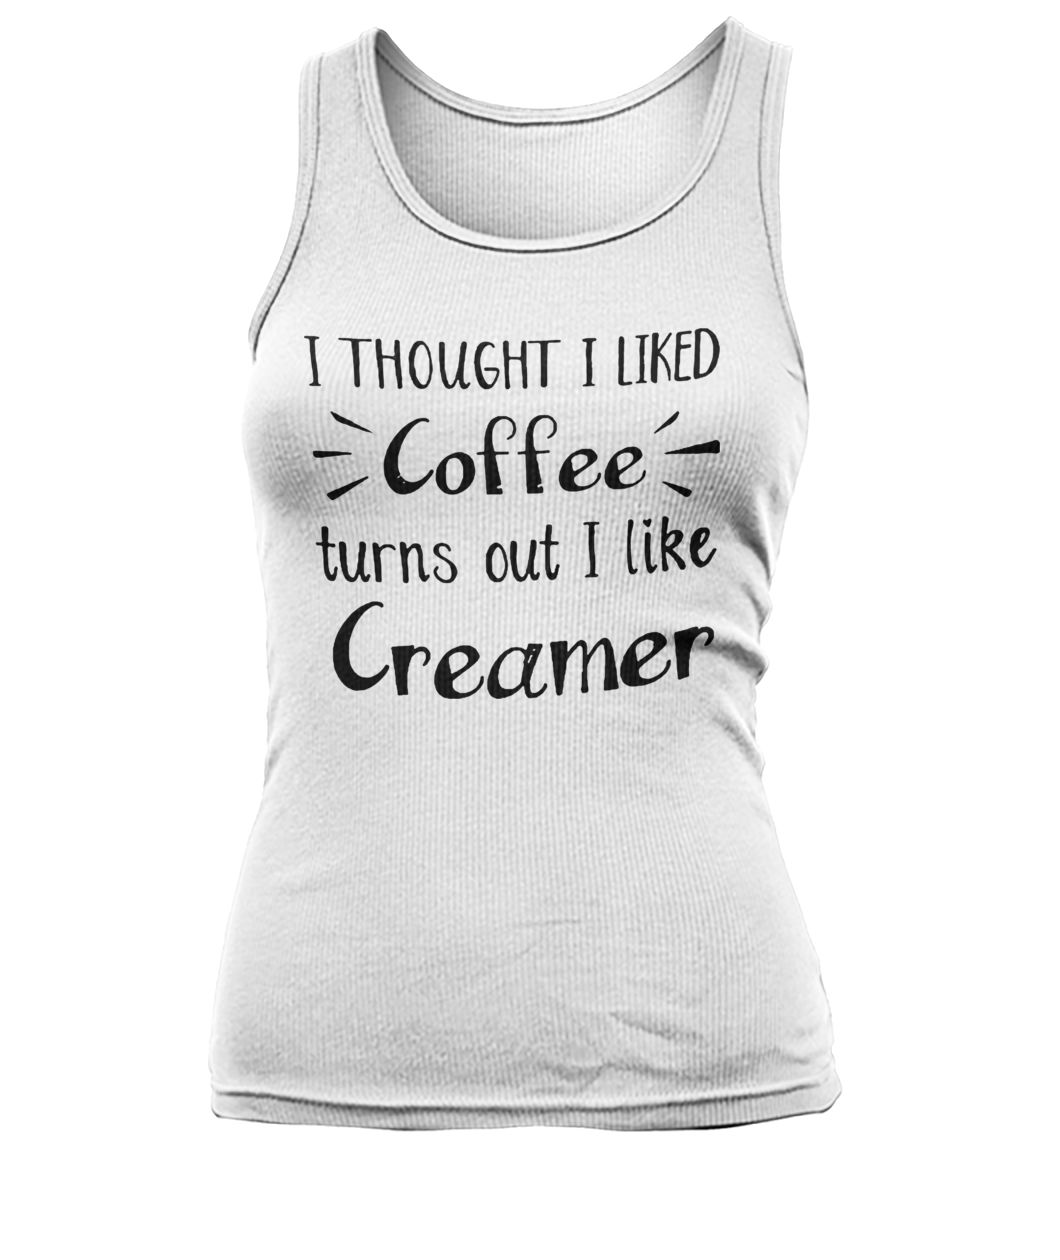 I thought I liked coffee turns out I like creamer women's tank top